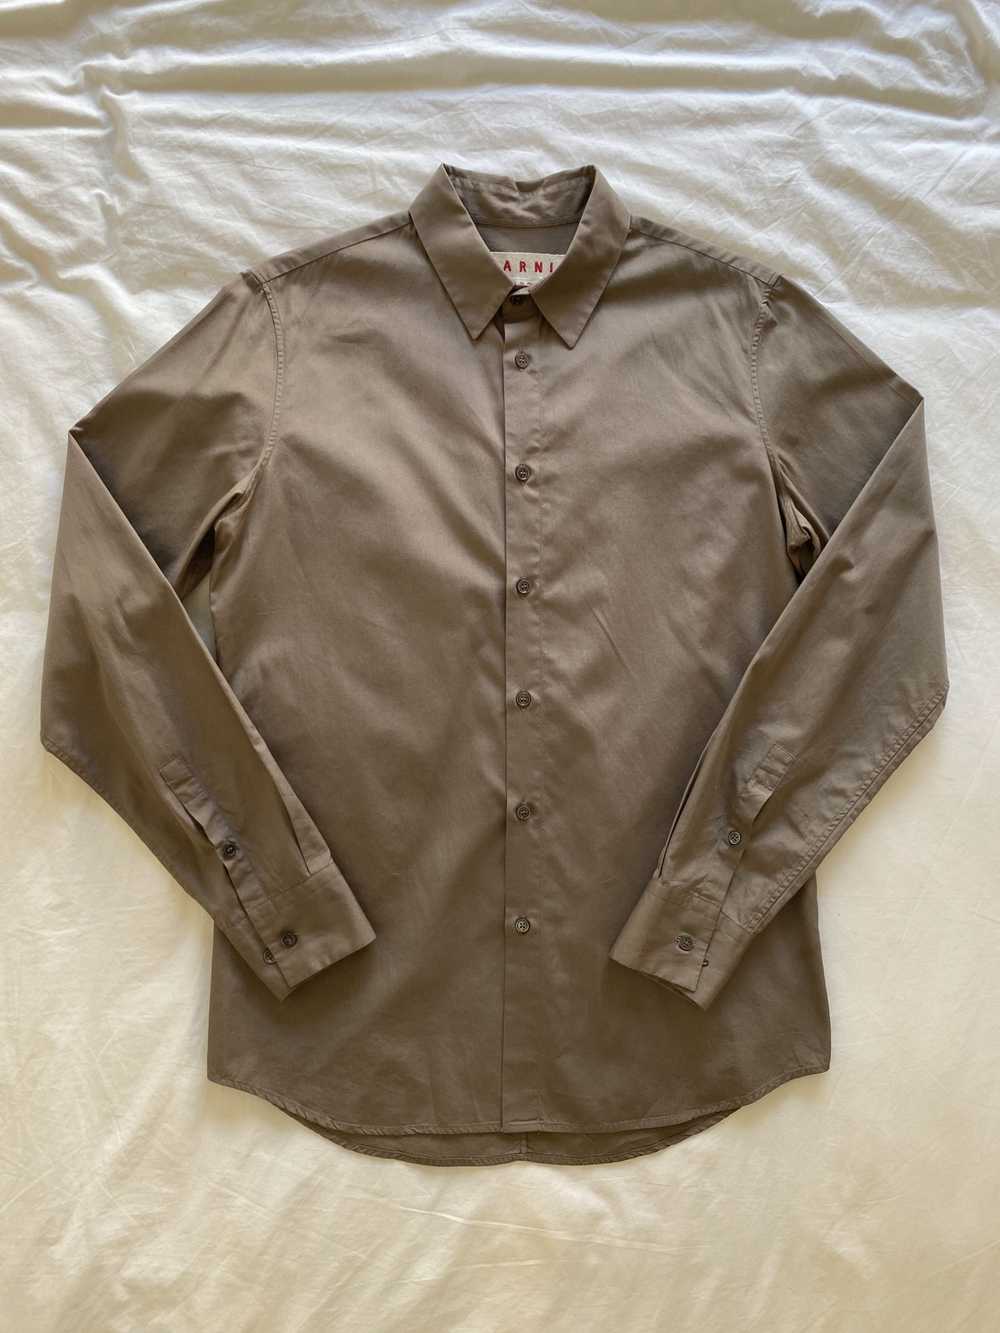 Marni Brown Fitted Dress Shirt - image 1